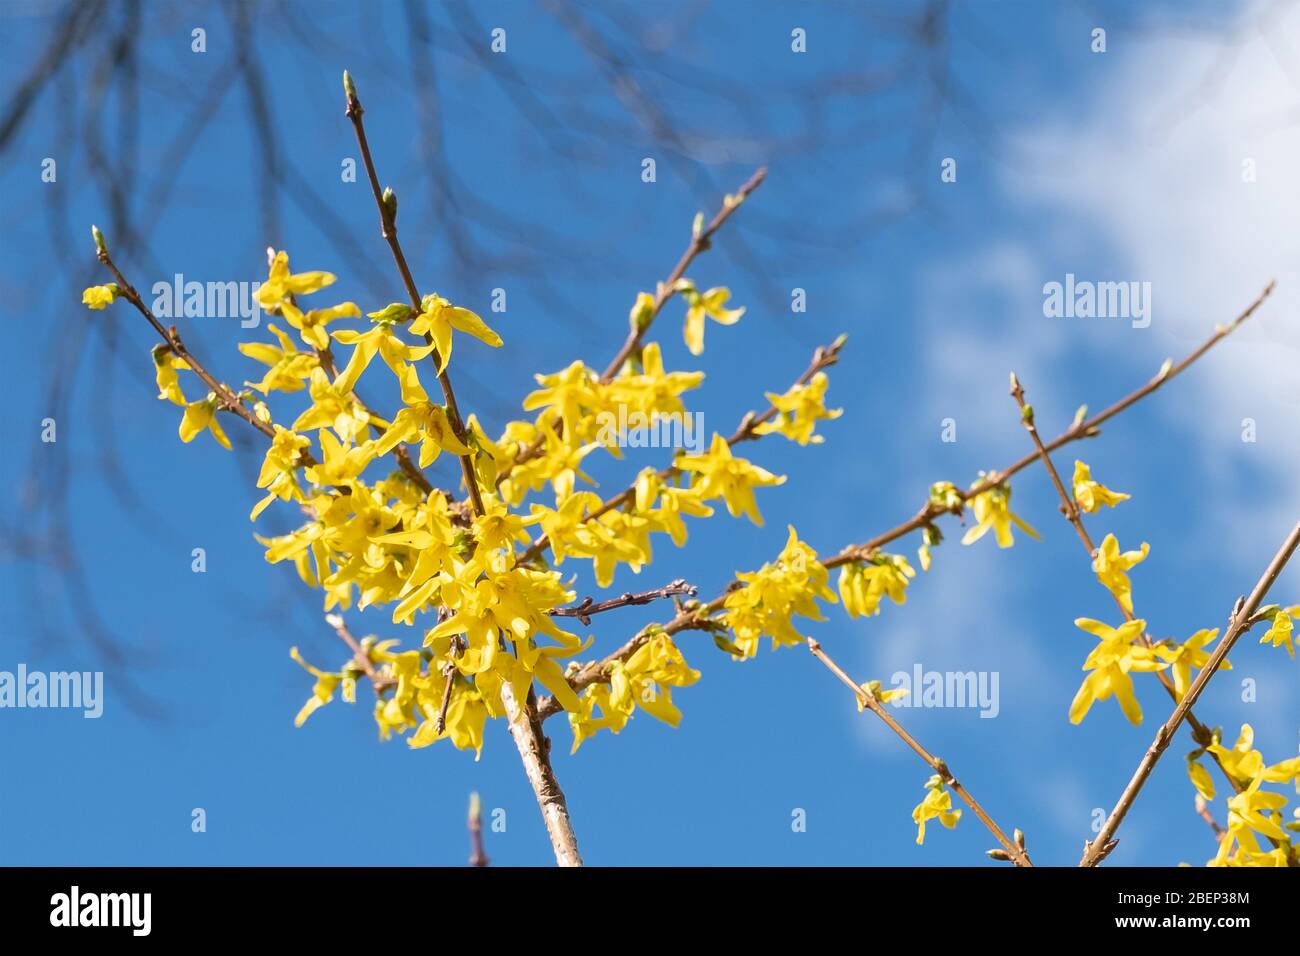 Spring floral Broom Cytisus 'Luna' Plant, beautiful fresh yellow flowers, isolated on blue sky background, selective focus. Stock Photo